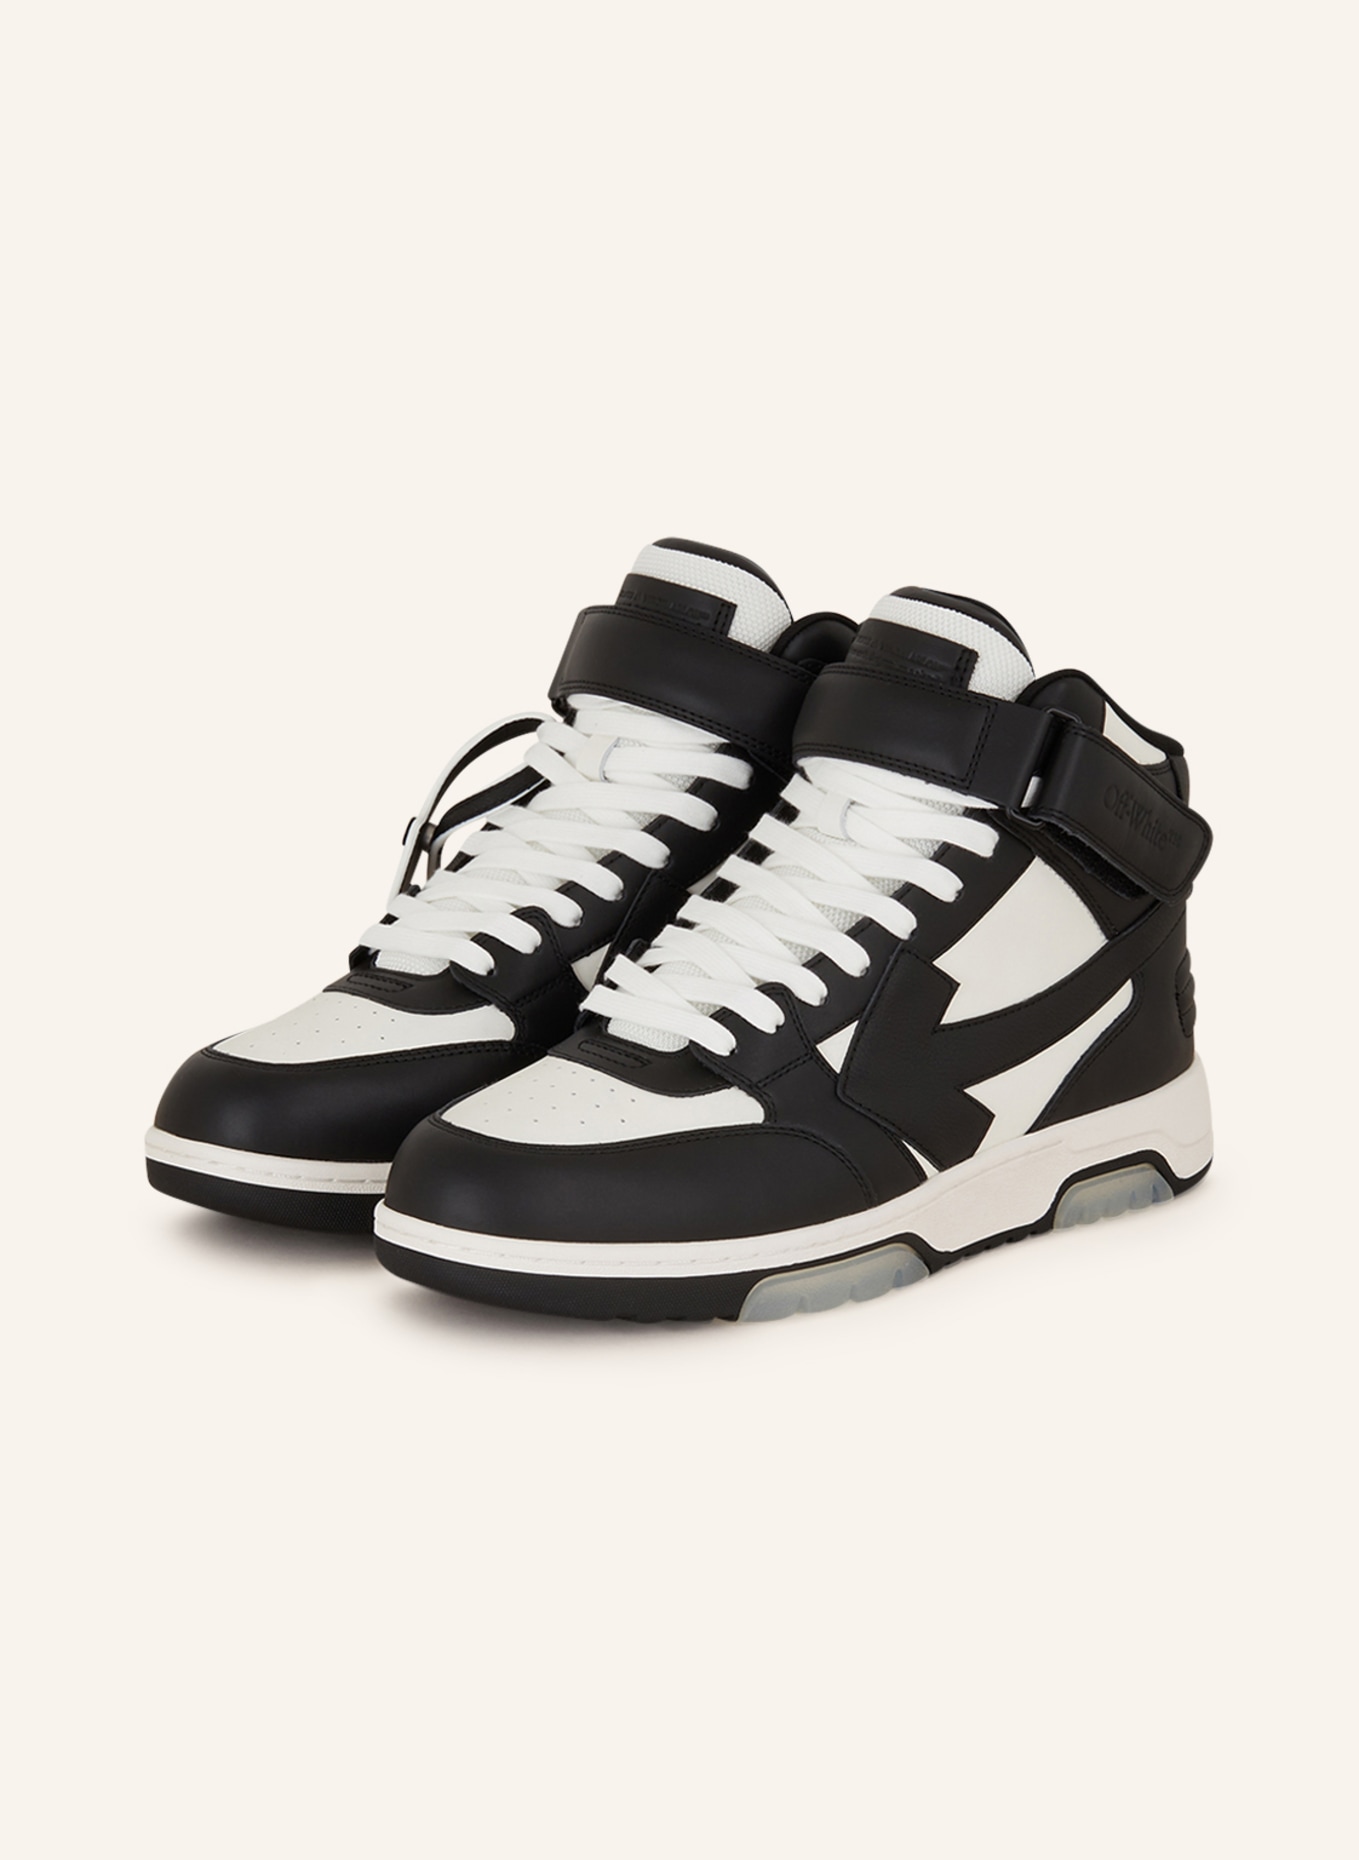 Off-White Hightop-Sneaker OUT OF OFFICE, Farbe: SCHWARZ/ WEISS (Bild 1)